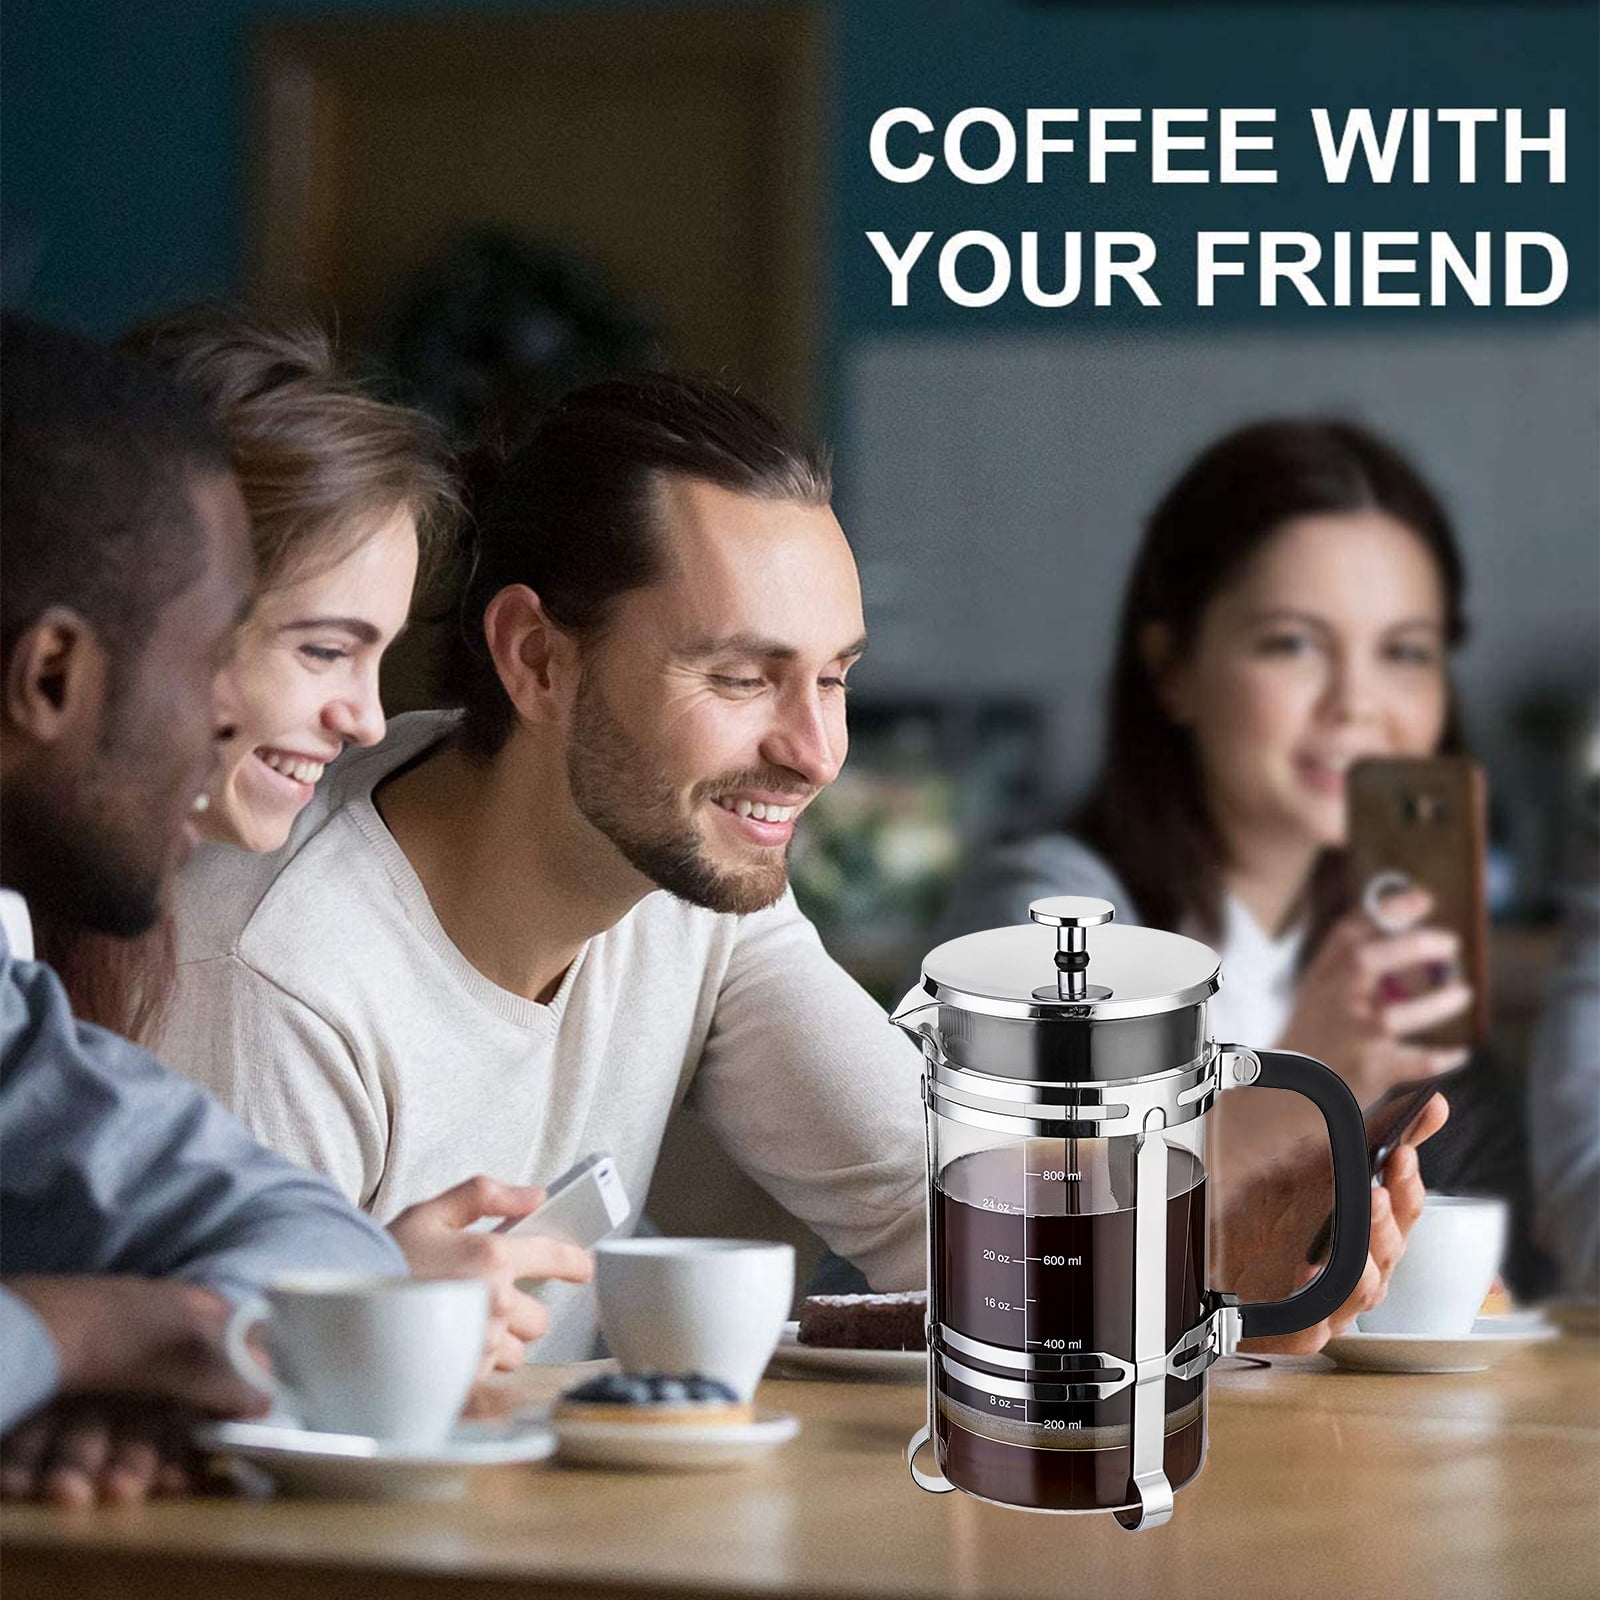 French Press Coffee Maker (34 oz) with 4 Filters - 304 Durable Stainless  Steel,Heat Resistant Borosilicate Glass Coffee Press,BPA Free,Brown（include  1